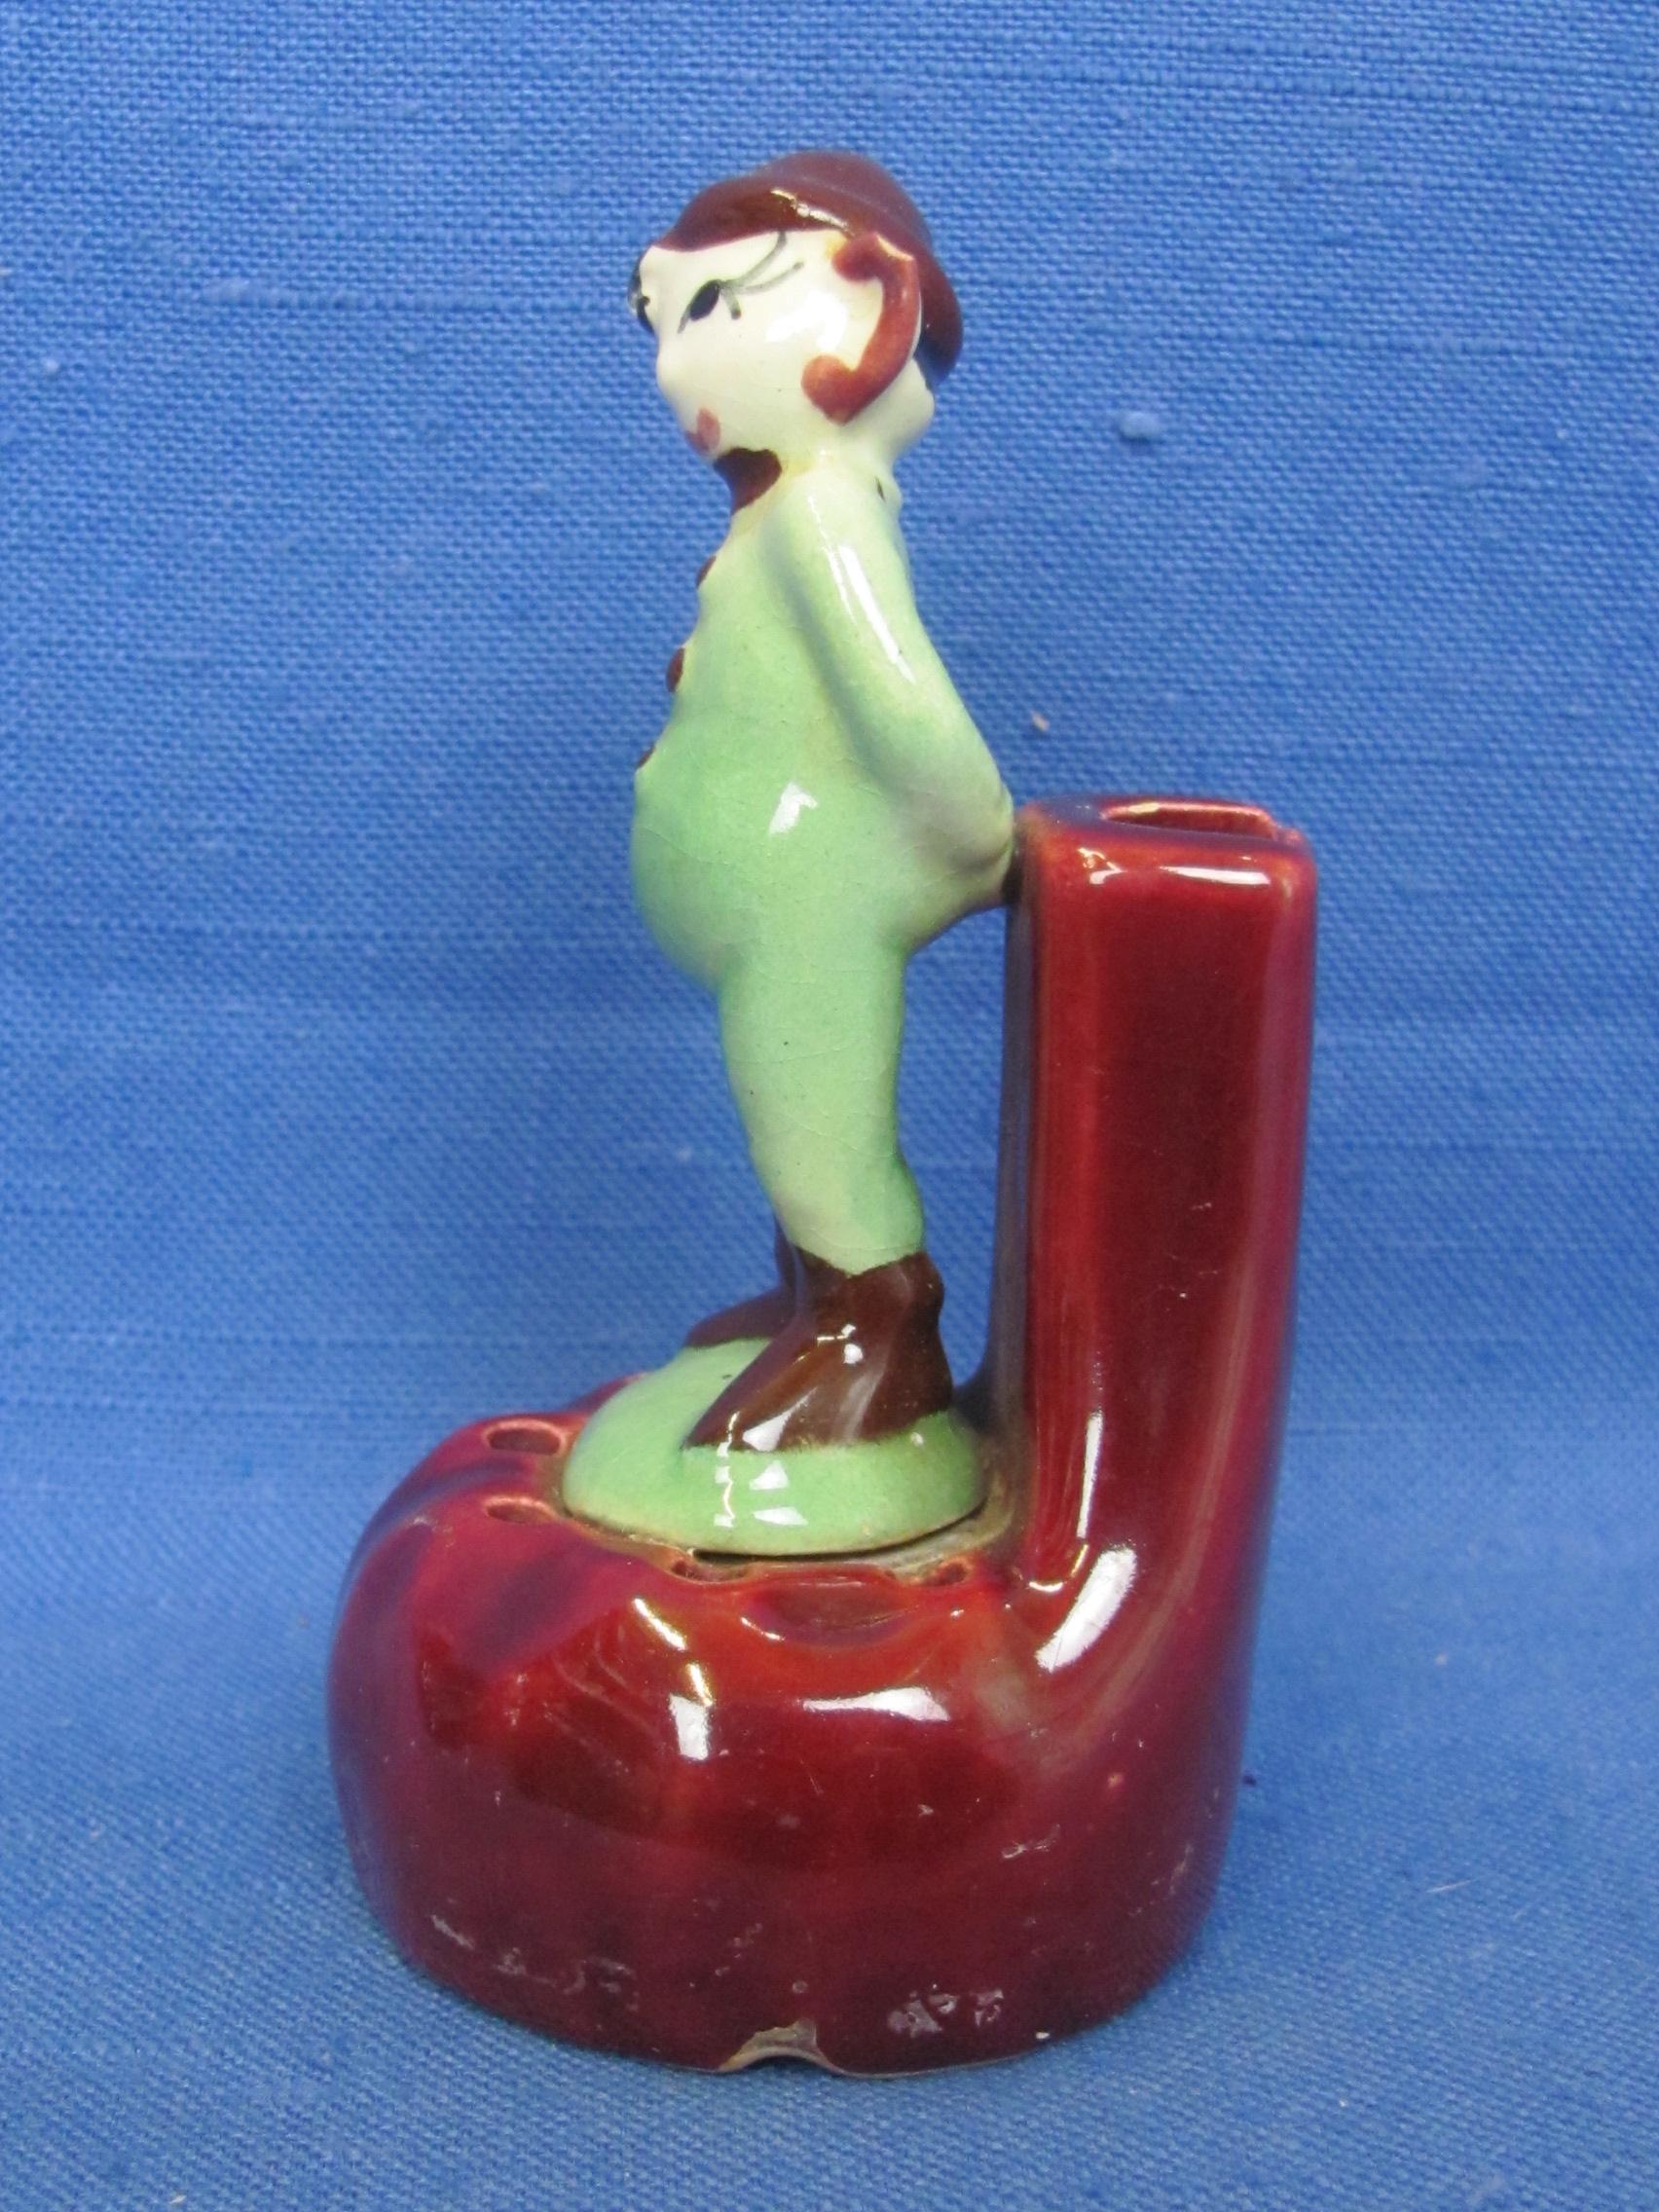 Vintage Pottery Pixie Flower Frog & Bud Vase – 4 1/4” tall – Good condition